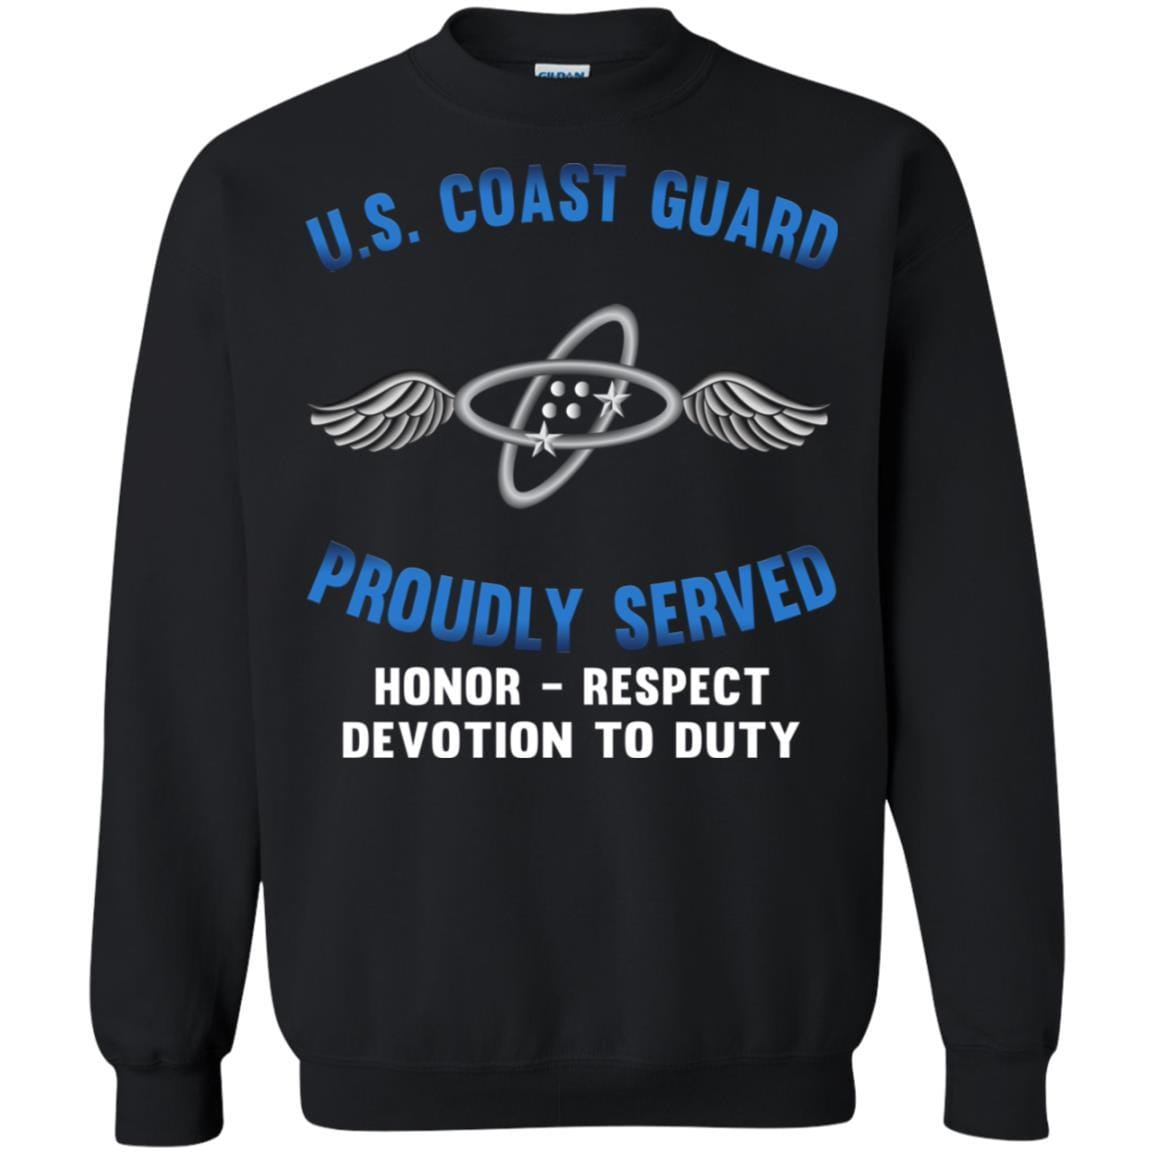 US Coast Guard Aviation Electronics Technician AET Logo Proudly Served T-Shirt For Men On Front-TShirt-USCG-Veterans Nation